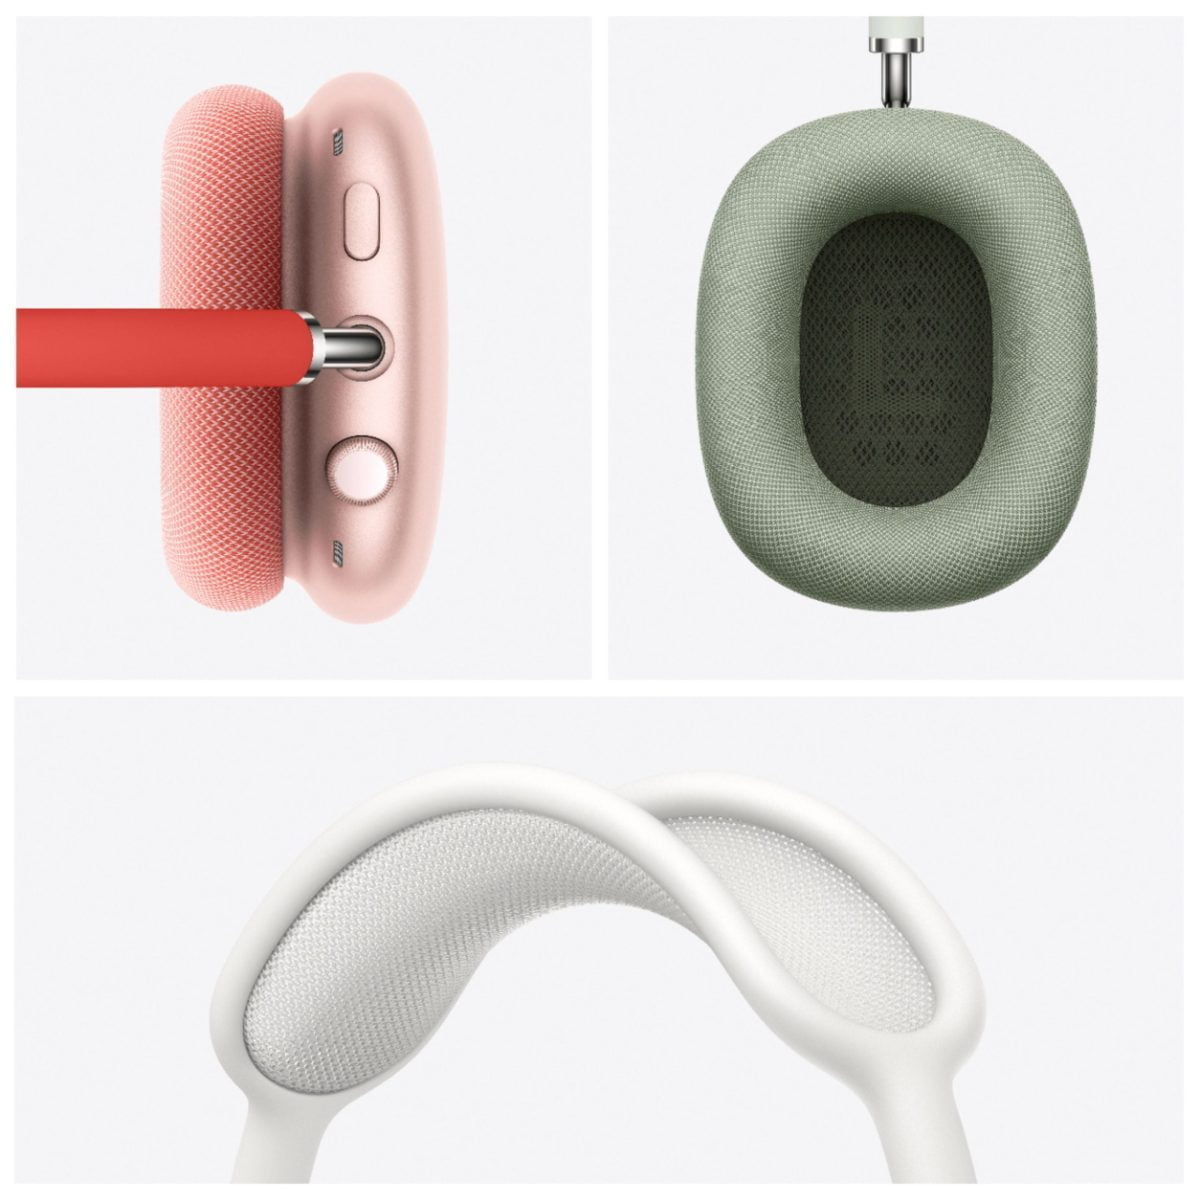 6373460Cv15D Scaled Apple &Lt;H1&Gt;Apple Airpods Max - Space Gray&Lt;/H1&Gt; &Lt;Div Class=&Quot;Long-Description-Container Body-Copy &Quot;&Gt; &Lt;Div Class=&Quot;Product-Description&Quot;&Gt;Airpods Max Reimagine Over-Ear Headphones. An Apple-Designed Dynamic Driver Provides Immersive High-Fidelity Audio. Every Detail, From Canopy To Cushions, Has Been Designed For An Exceptional Fit. Active Noise Cancellation Blocks Outside Noise, While Transparency Mode Lets It In. And Spatial Audio With Dynamic Head Tracking Provides Theater-Like Sound That Surrounds You.&Lt;/Div&Gt; &Lt;/Div&Gt; Airpods Max Apple Airpods Max - Space Gray Mgyh3